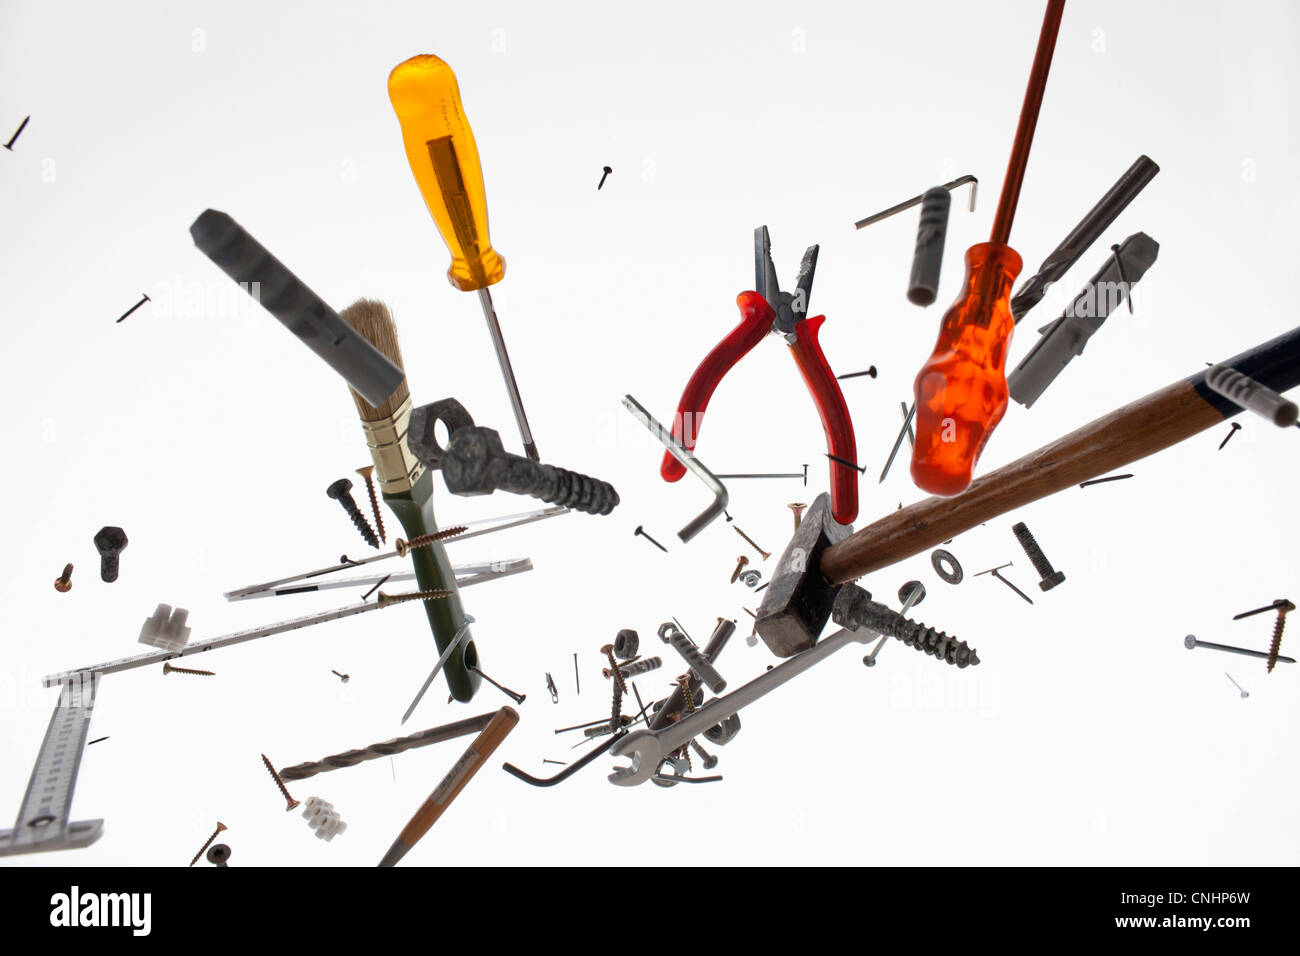 Hand tools and equipment against a white background Stock Photo